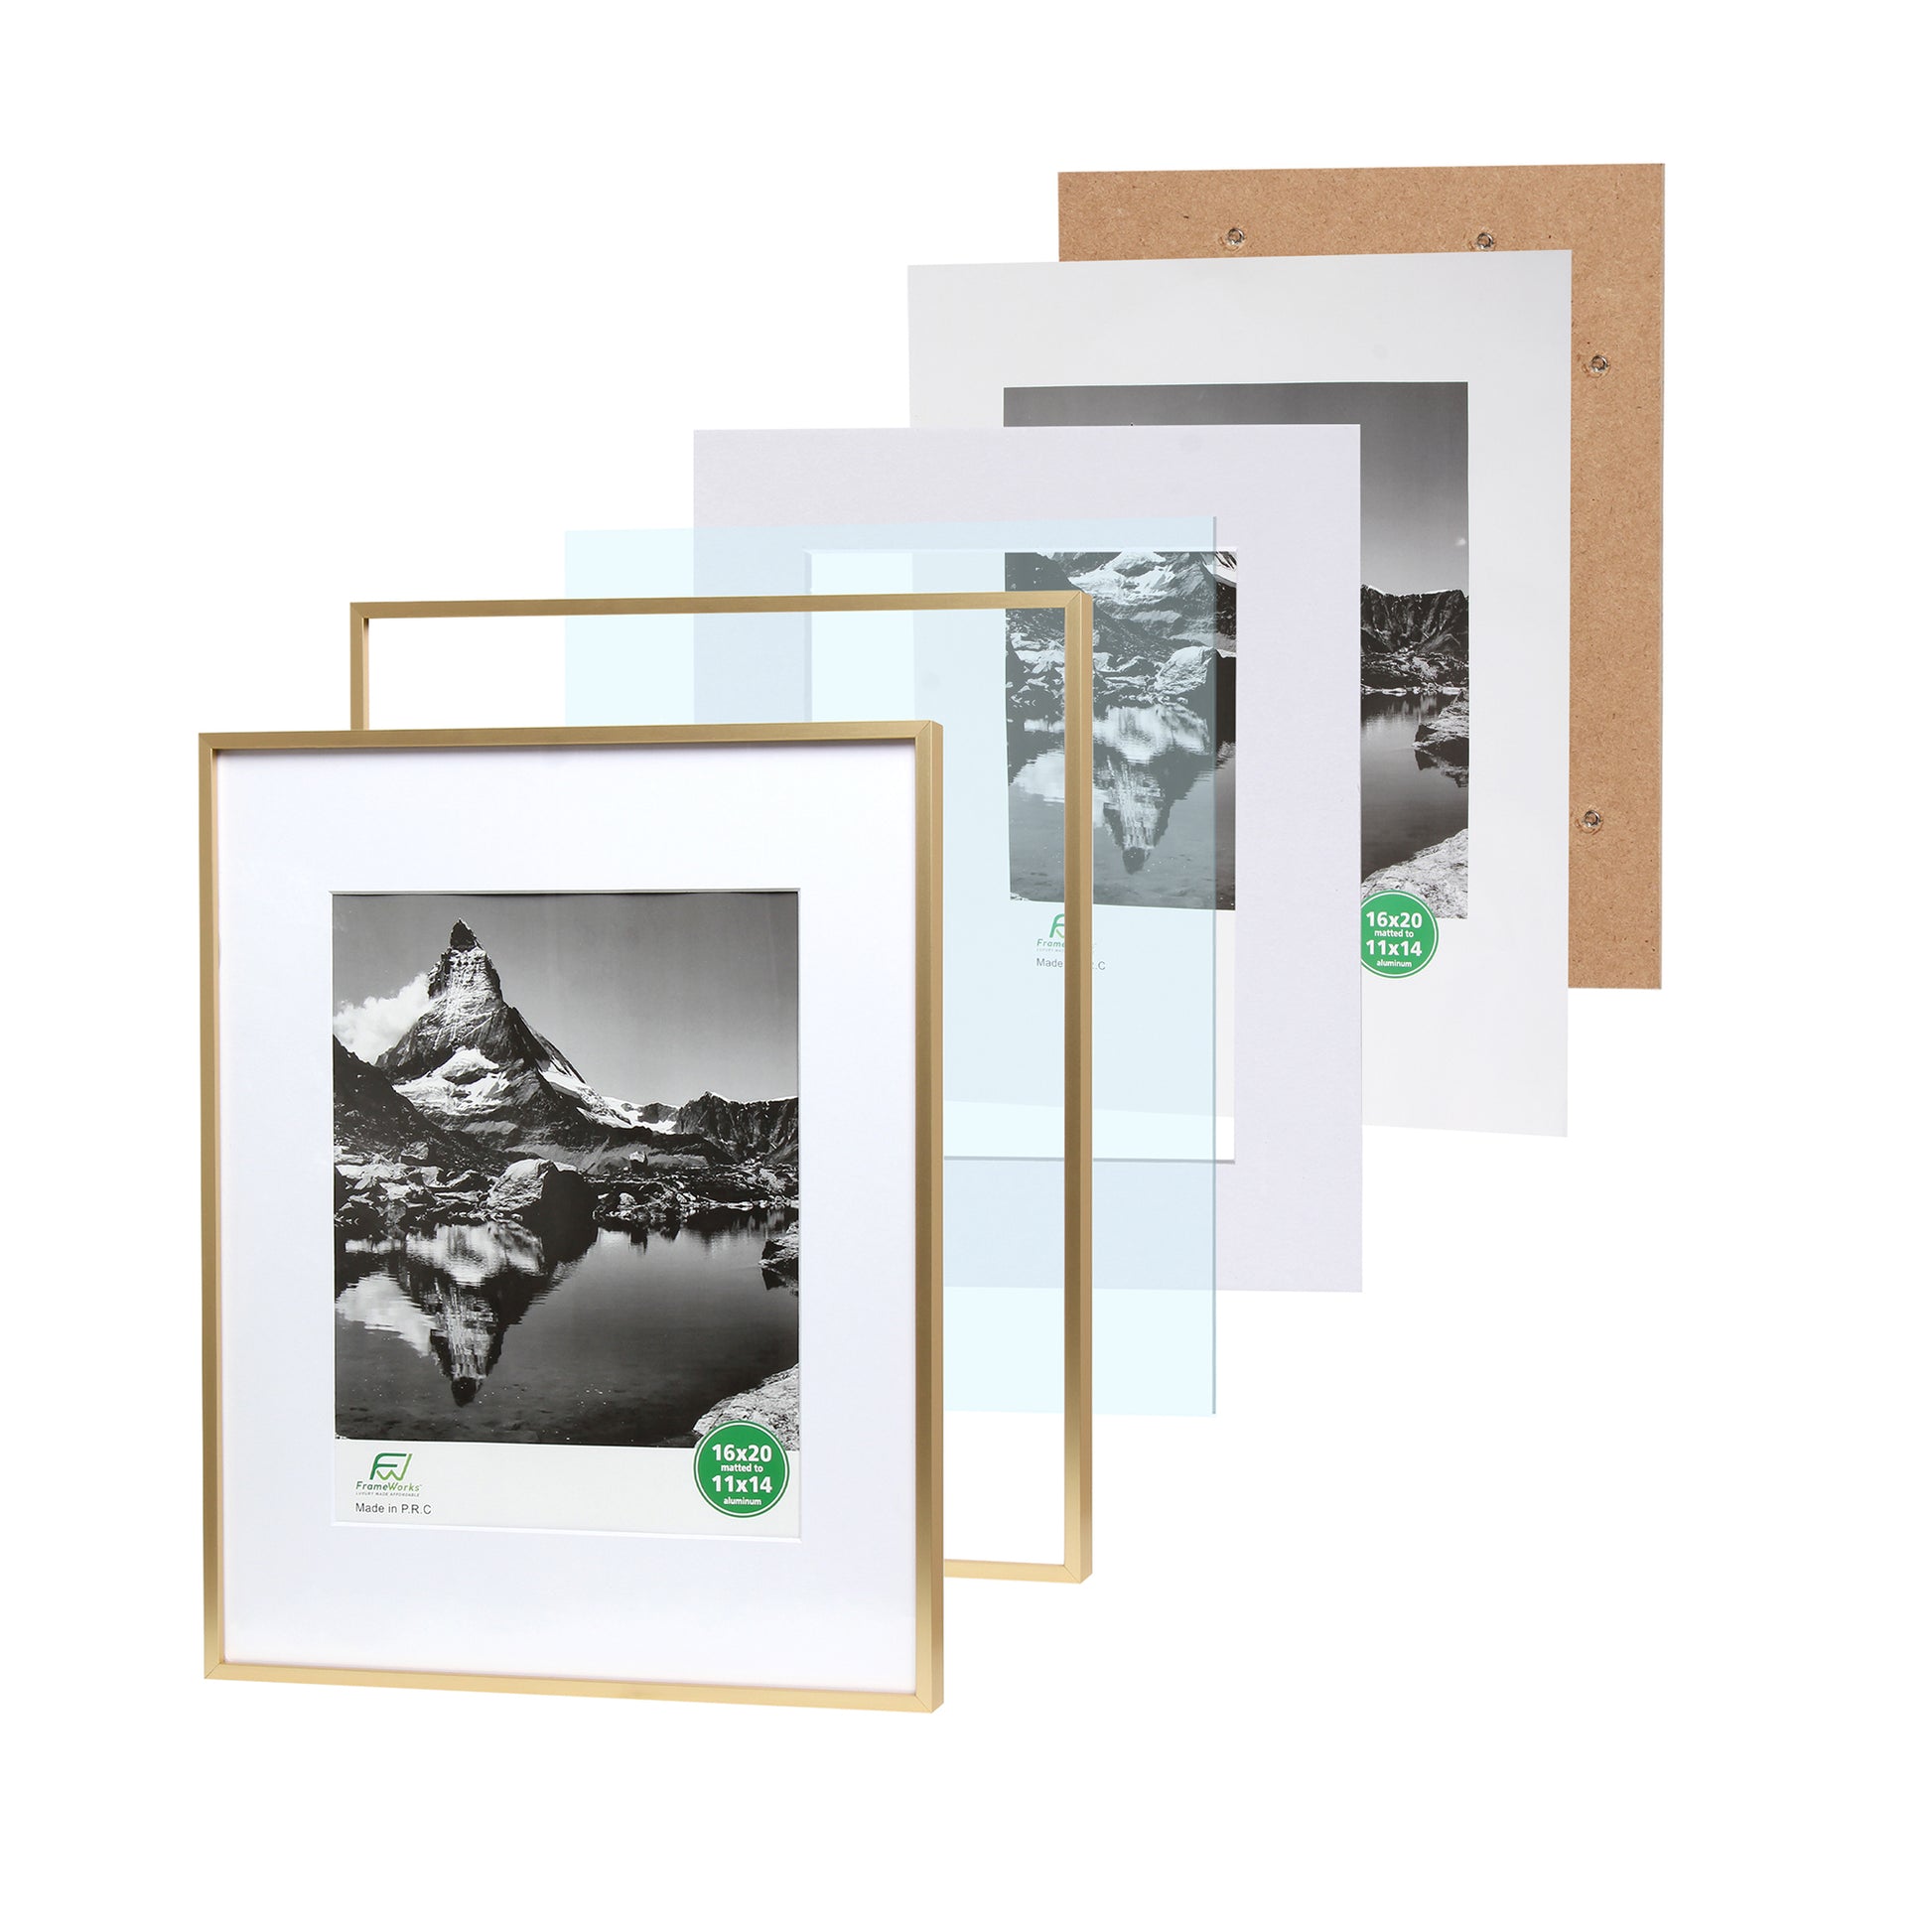 NEW Single, Gold Metal, 11x11 Photo Frame (8x8 Matted)